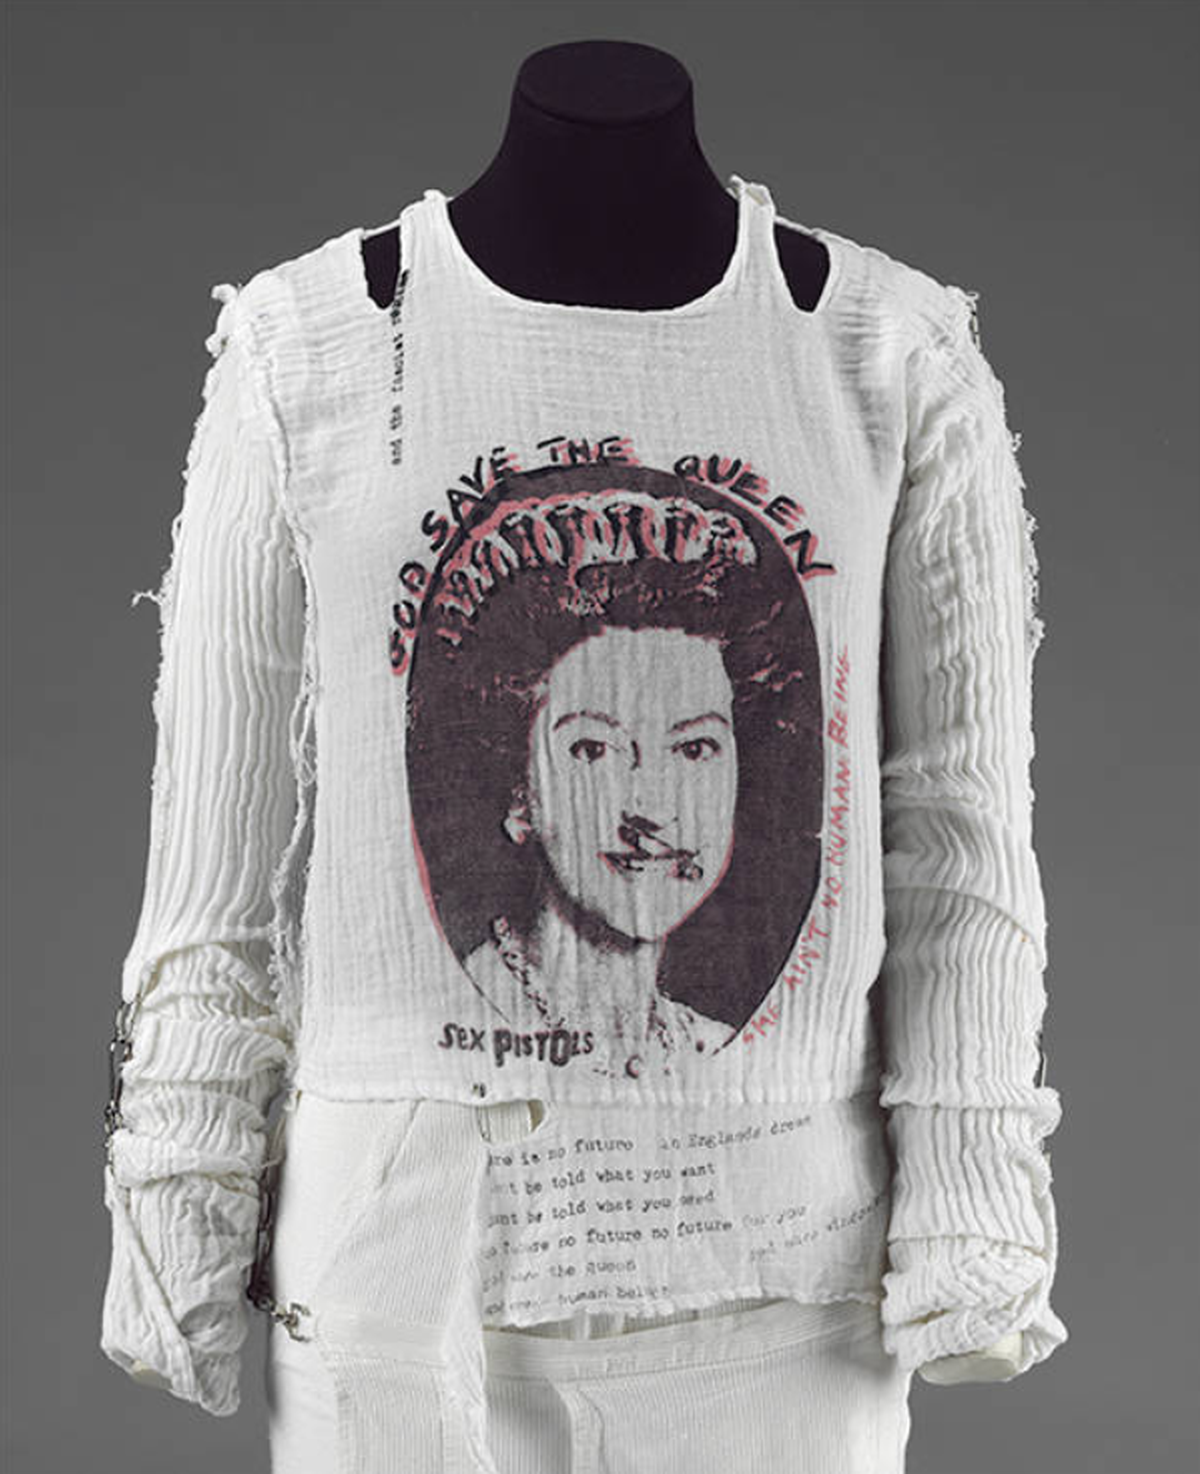 The ‘God save the queen’ tee at the V&A retrospective